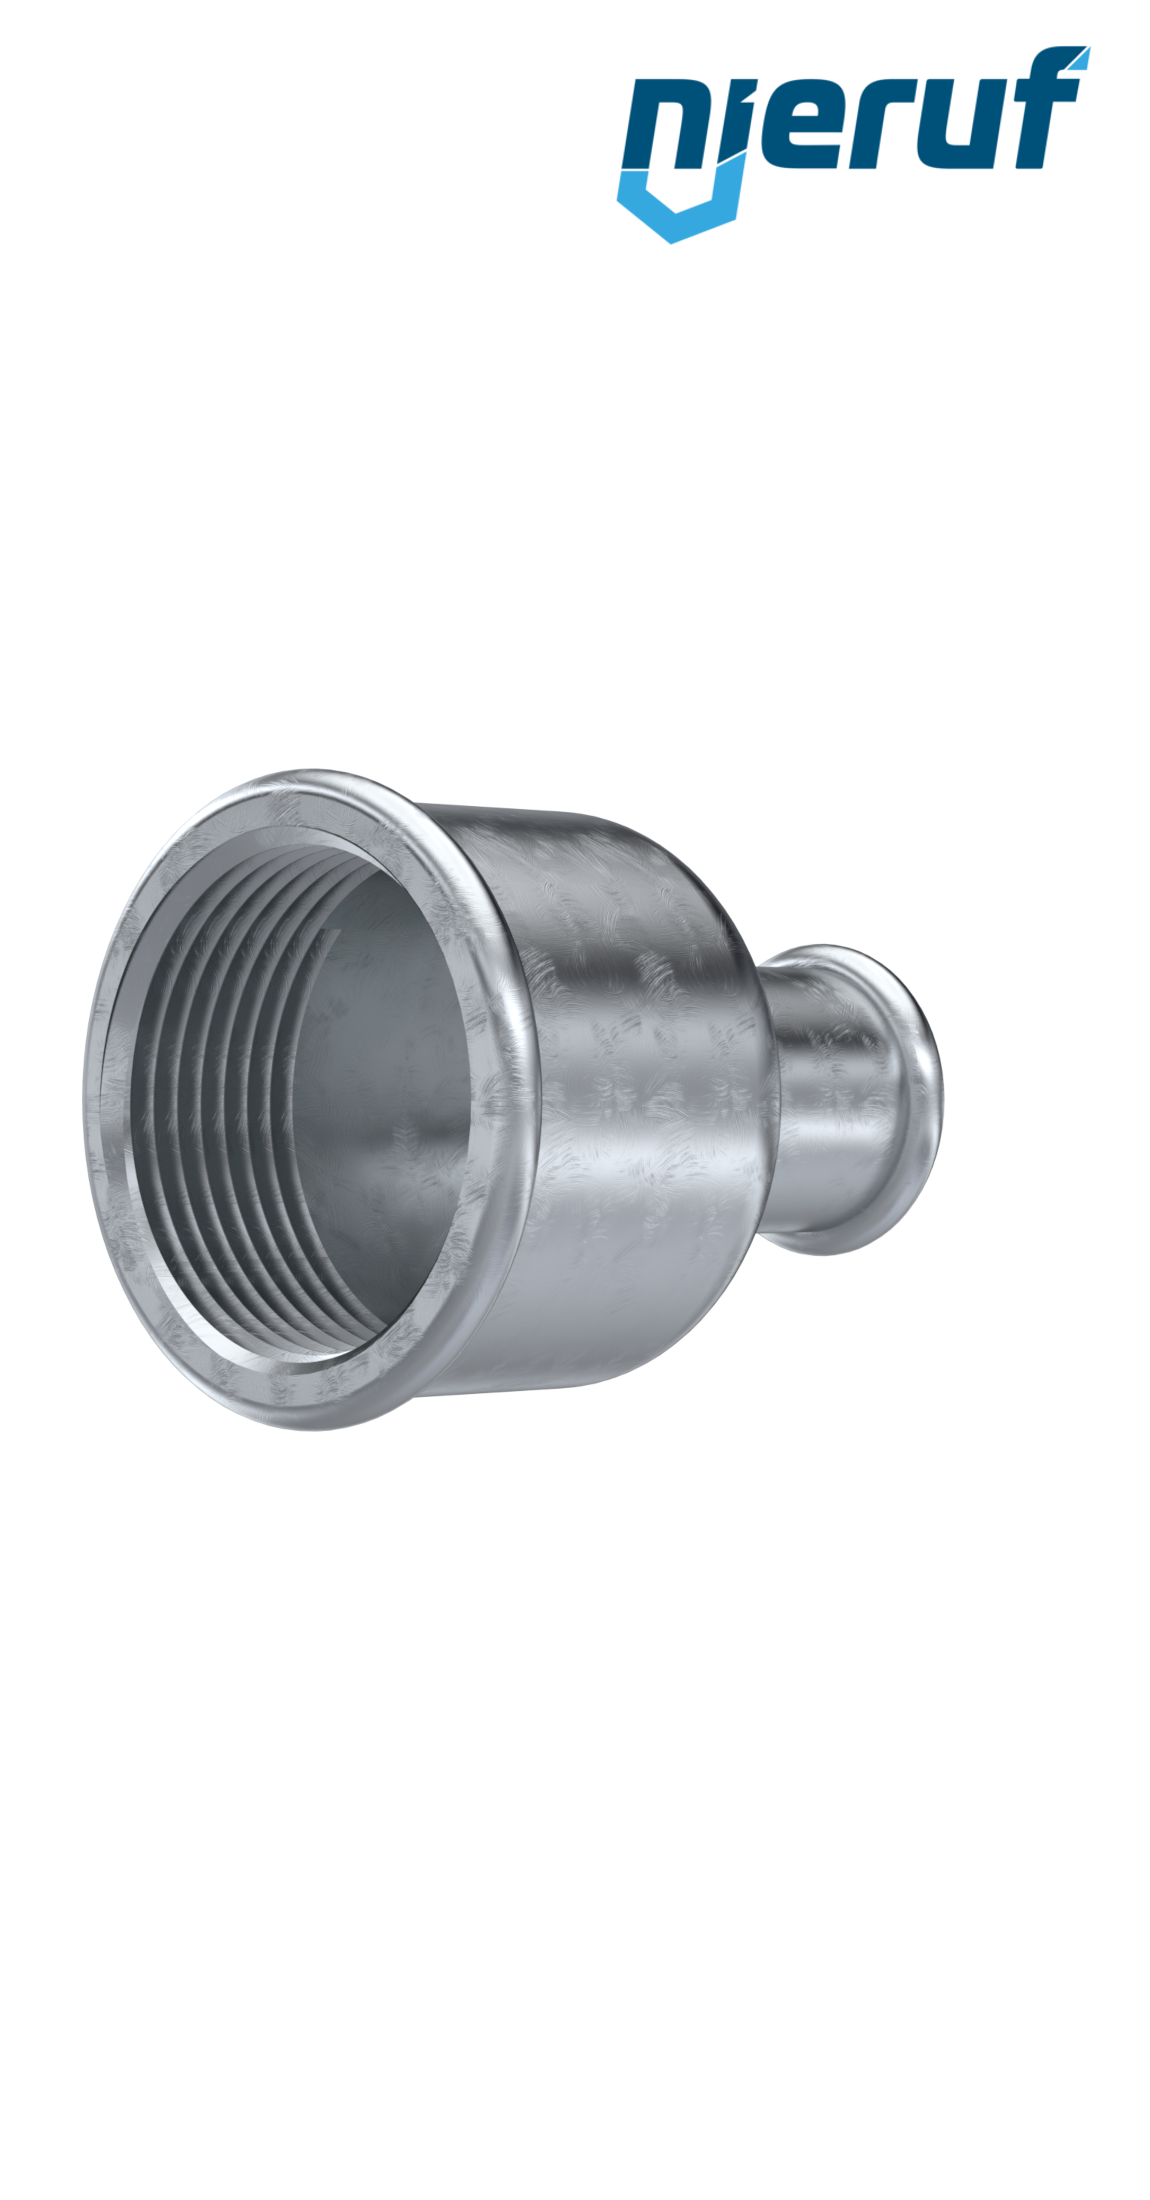 Malleable cast iron fitting reducing socket no. 240, 3" x 2 1/2" inch galvanized